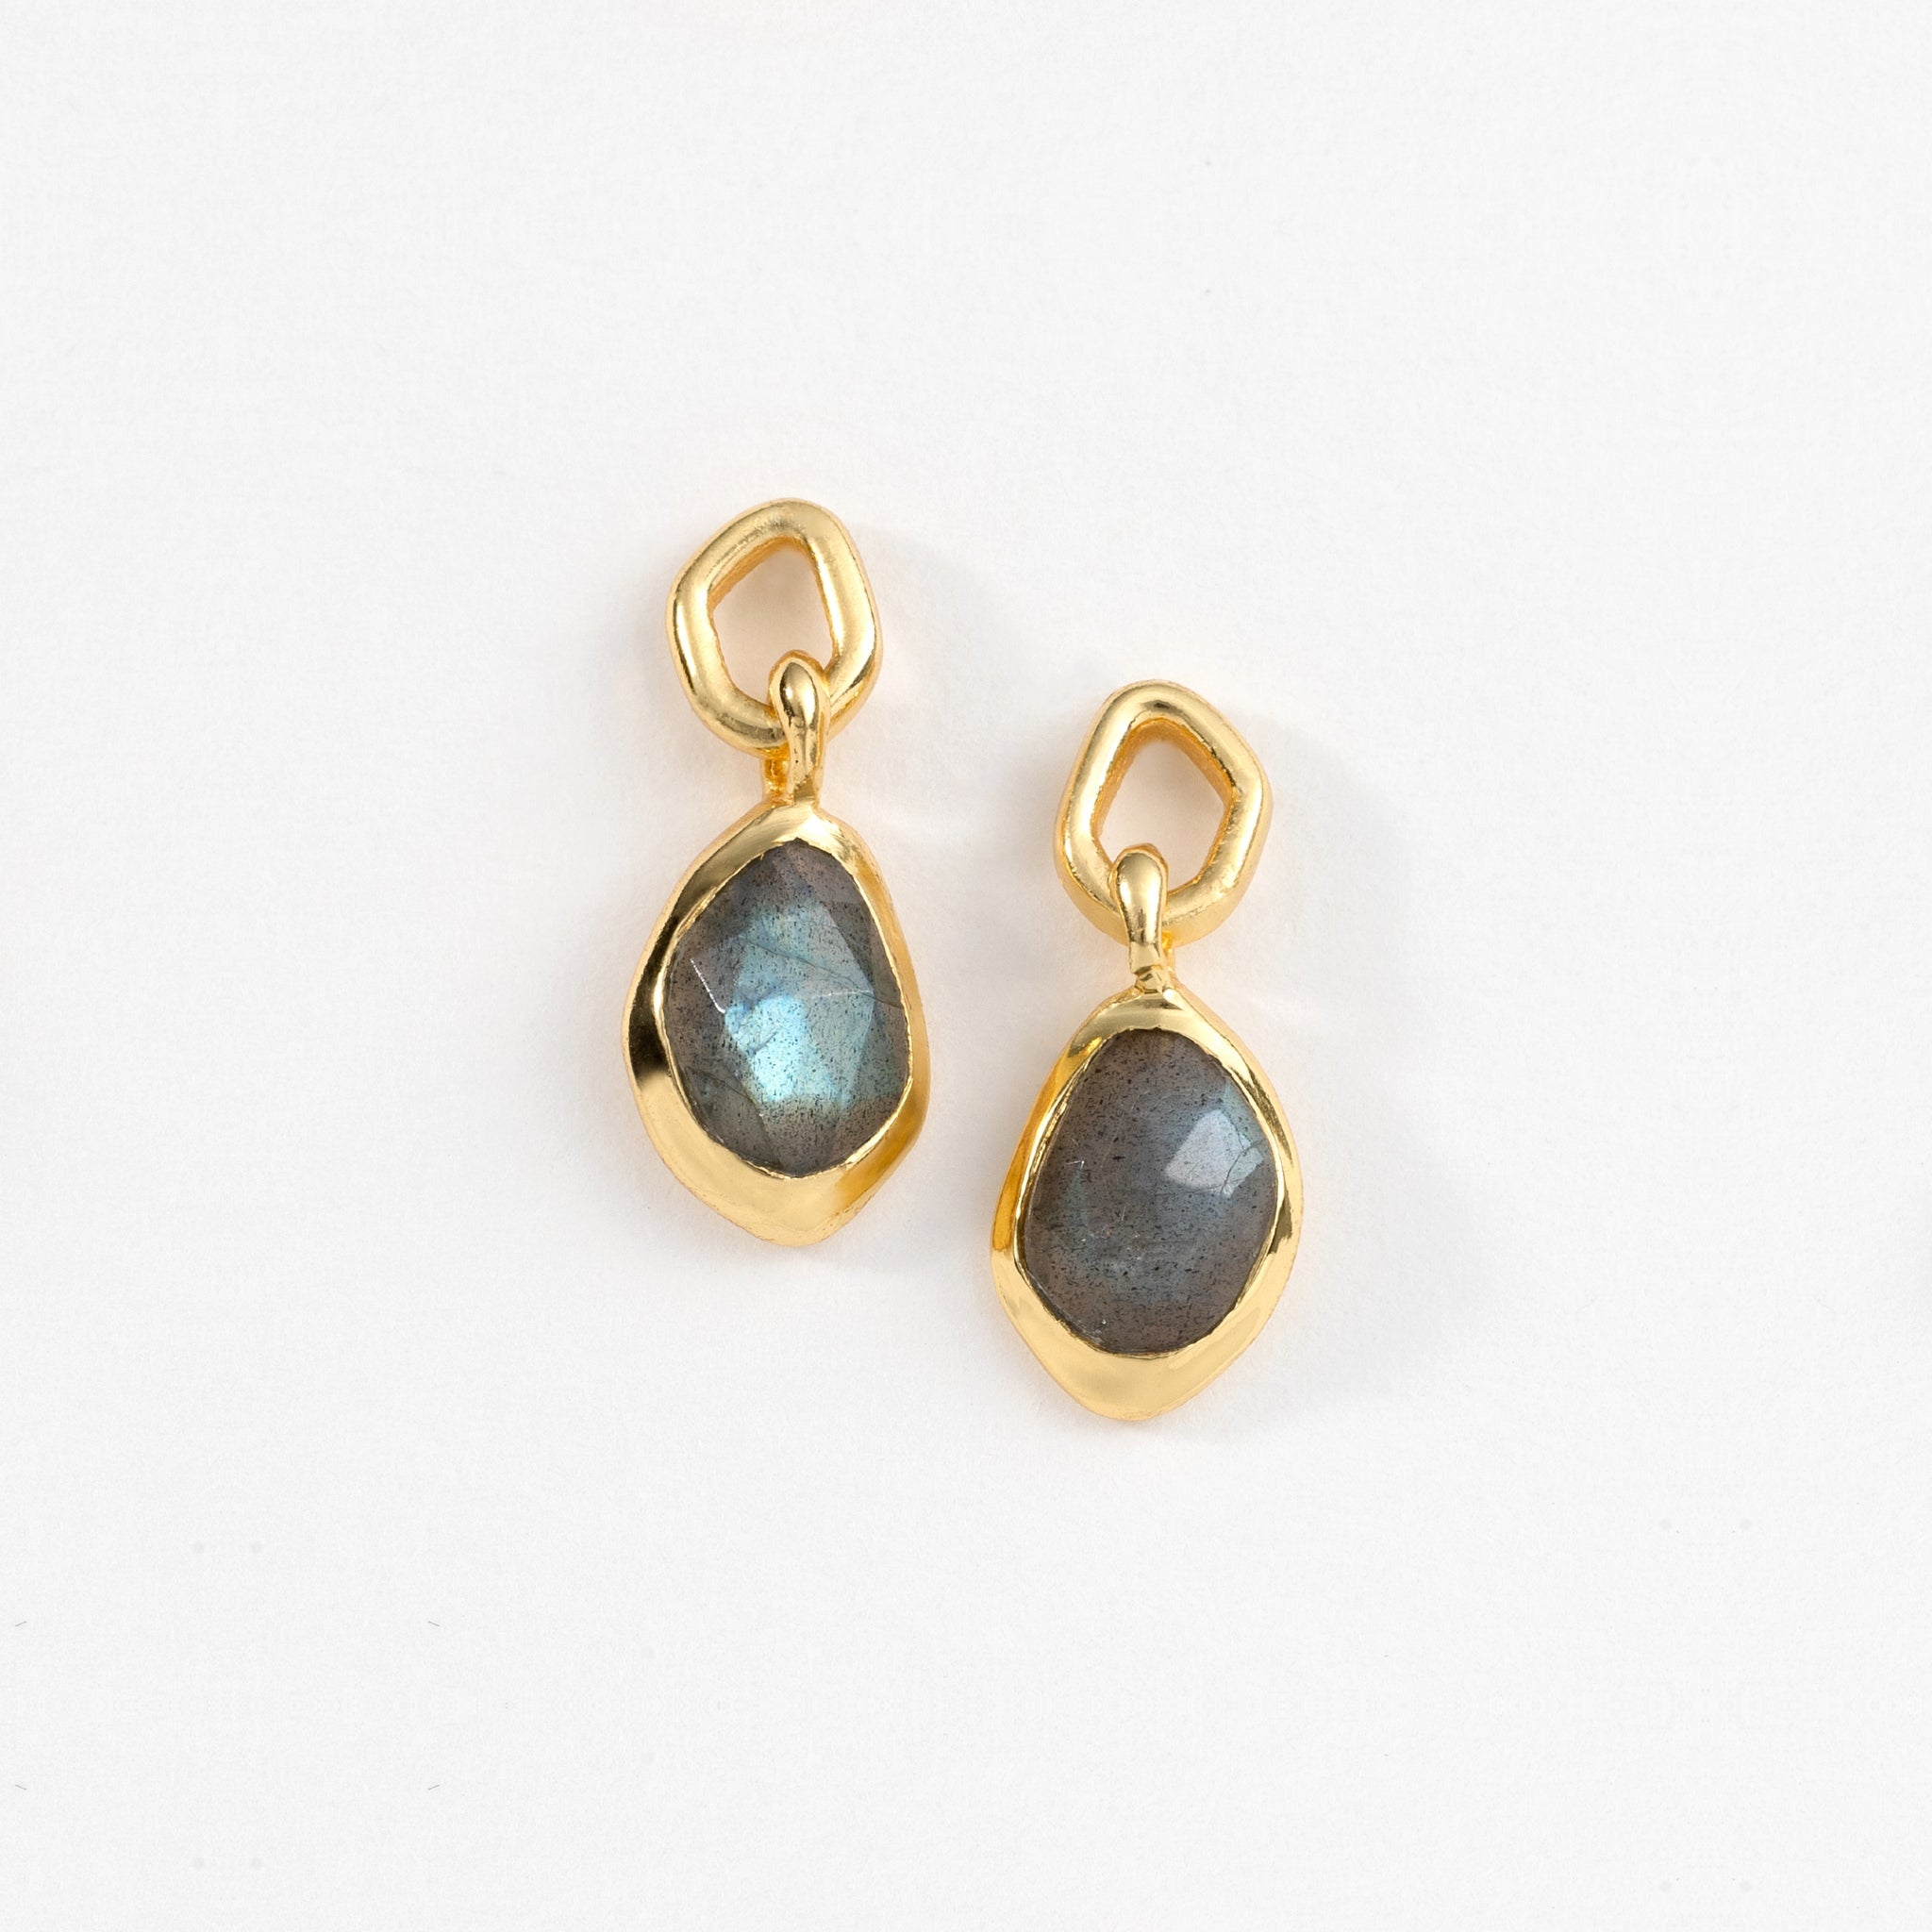 Earring features a sparkling, handcut natural gemstone and is crafted from sterling silver or 18ct gold vermeil.